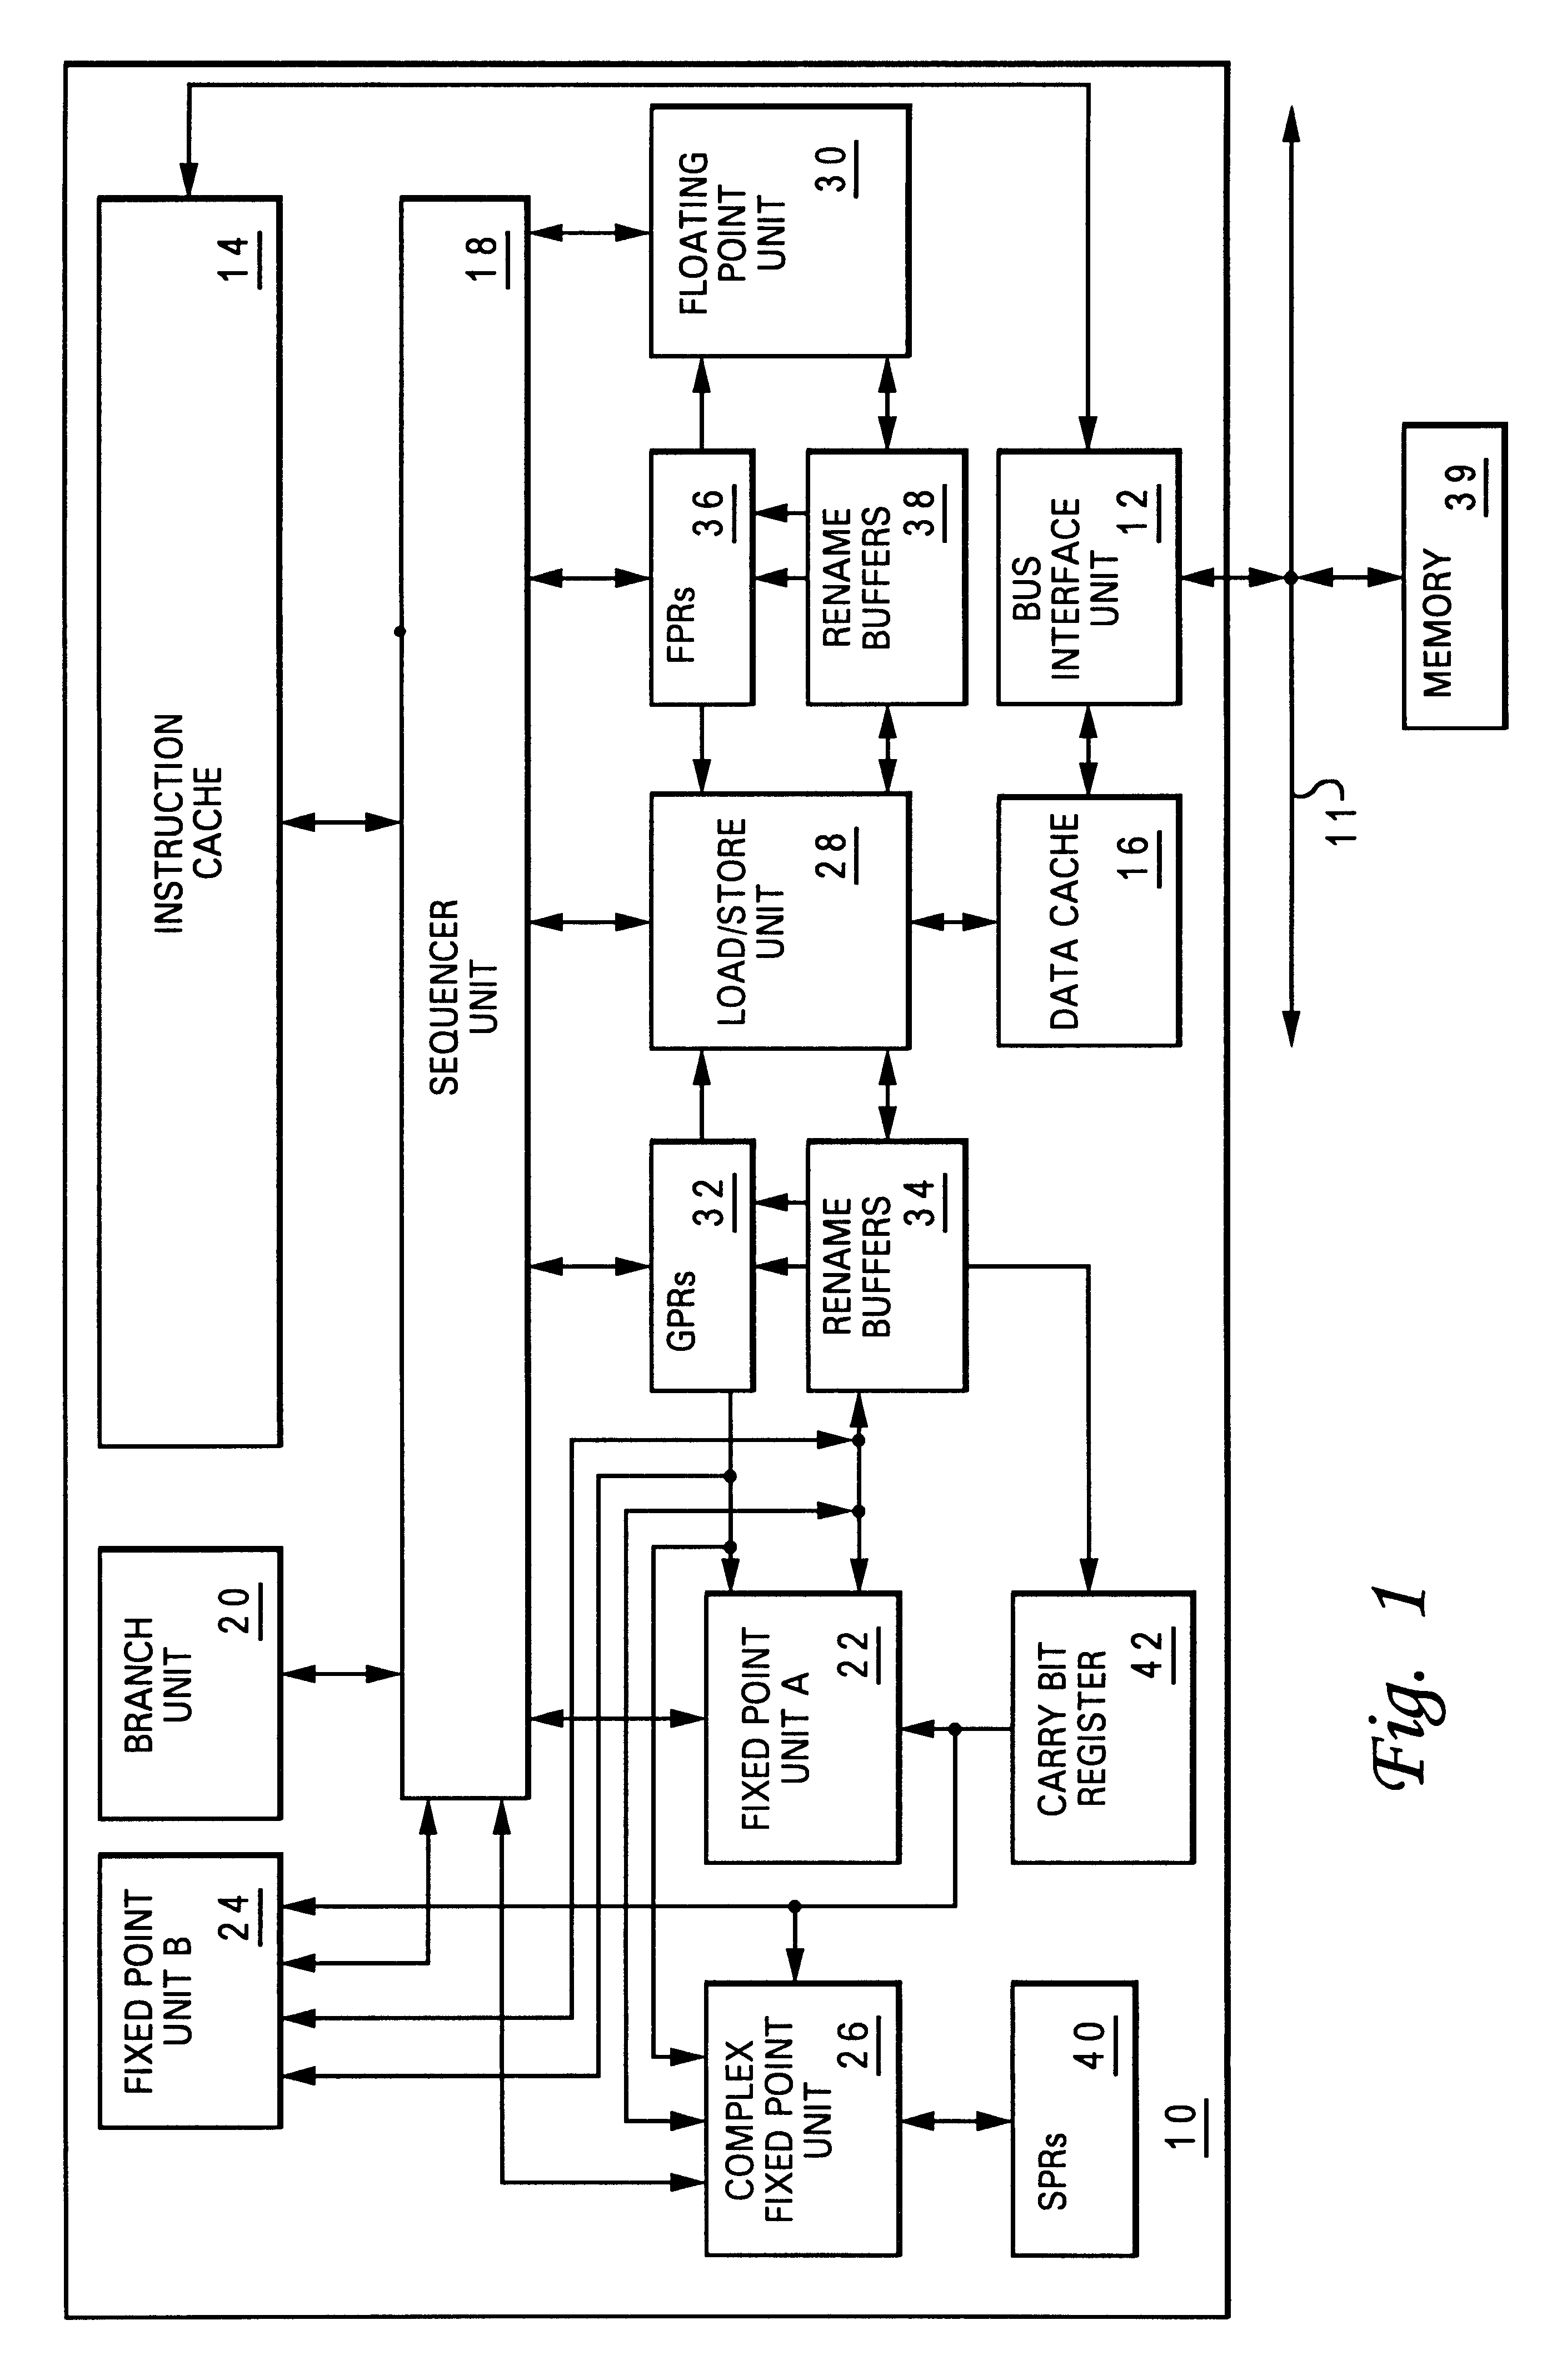 Apparatus and method of branch prediction utilizing a comparison of a branch history table to an aliasing table